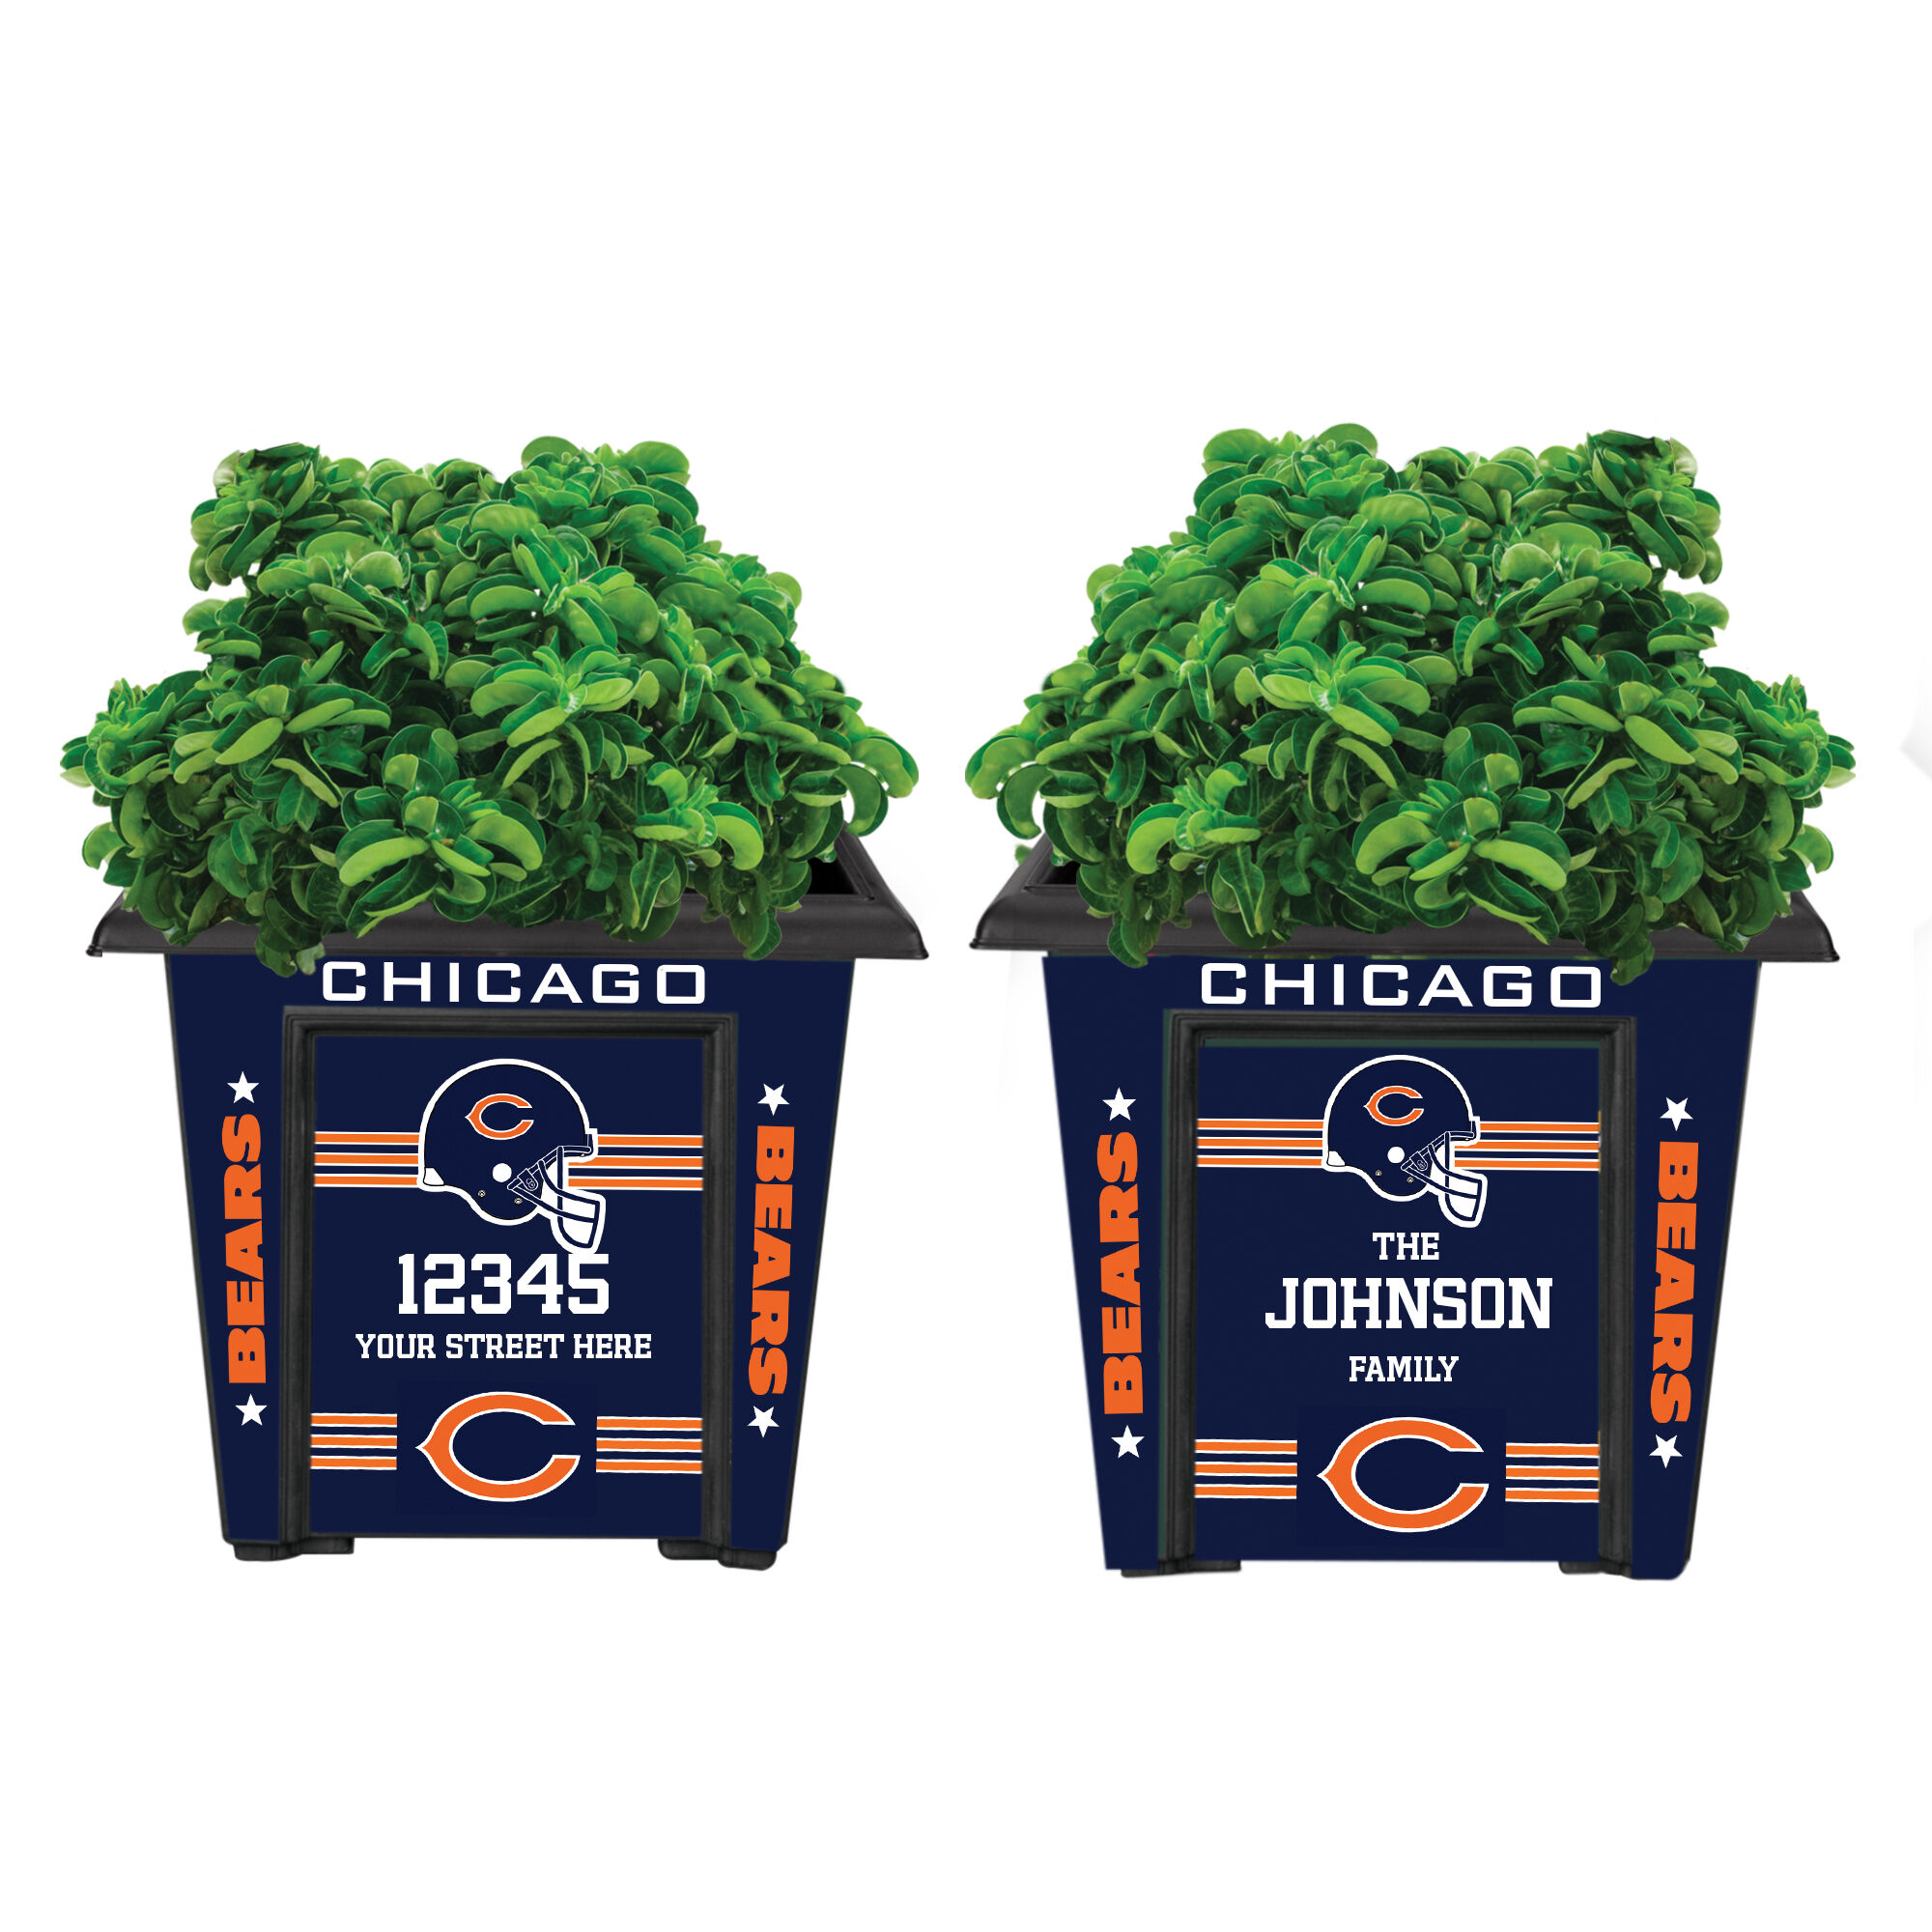 The NFL Personalized Planters 1929 0048 a bears